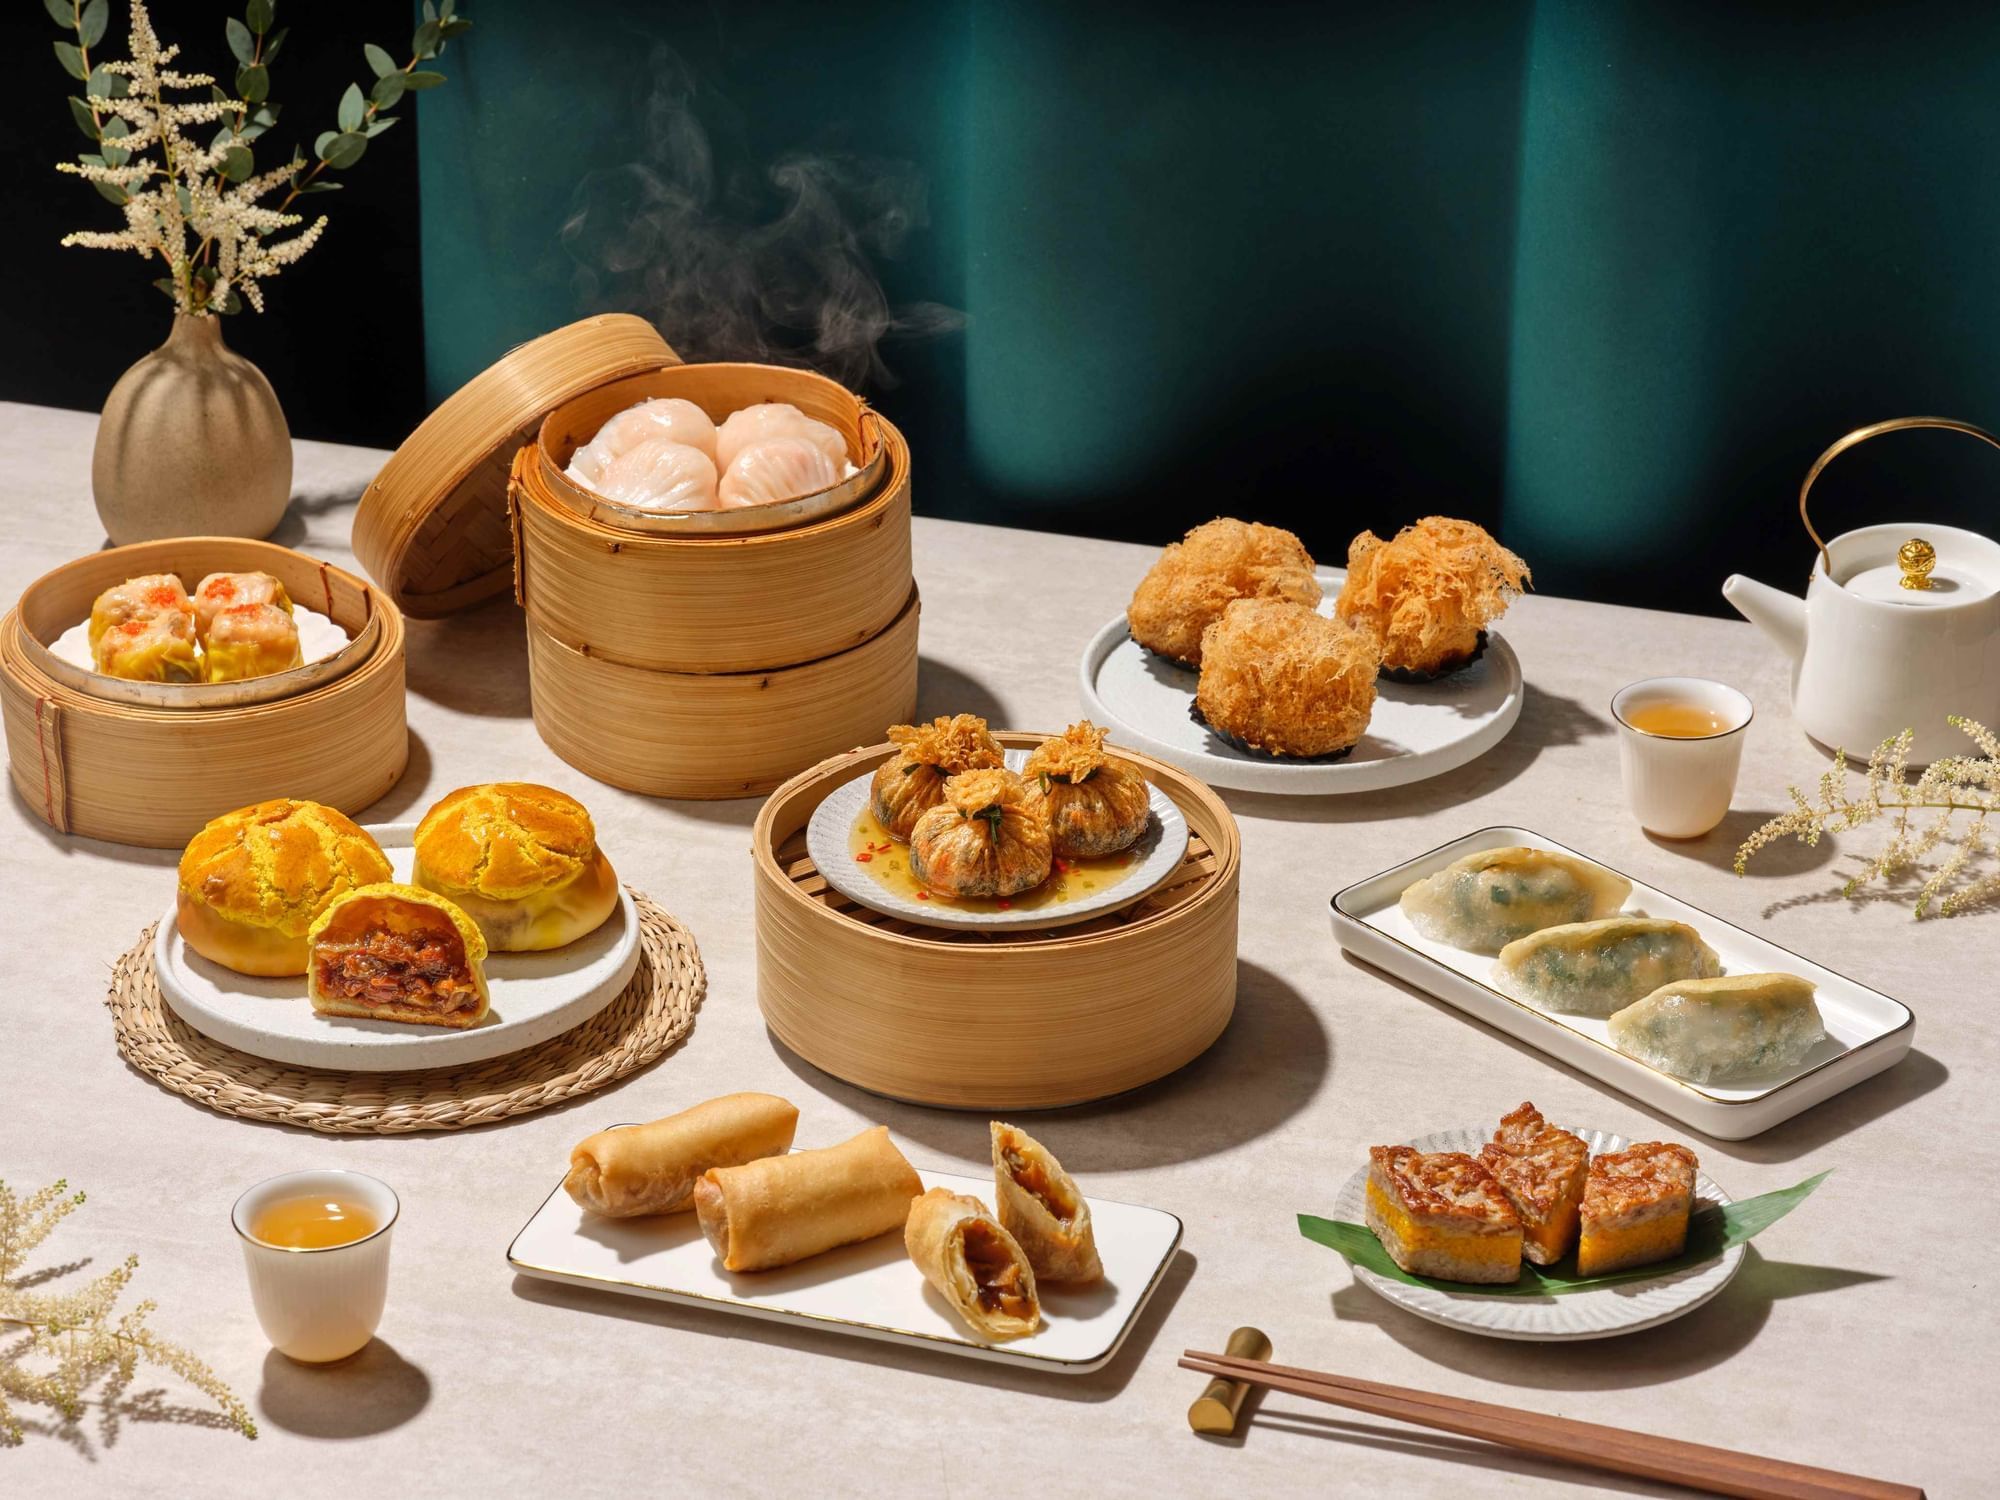 Tarts, pastries, and cake served in Wah Lok Cantonese Restaurant at Carlton Hotel Singapore